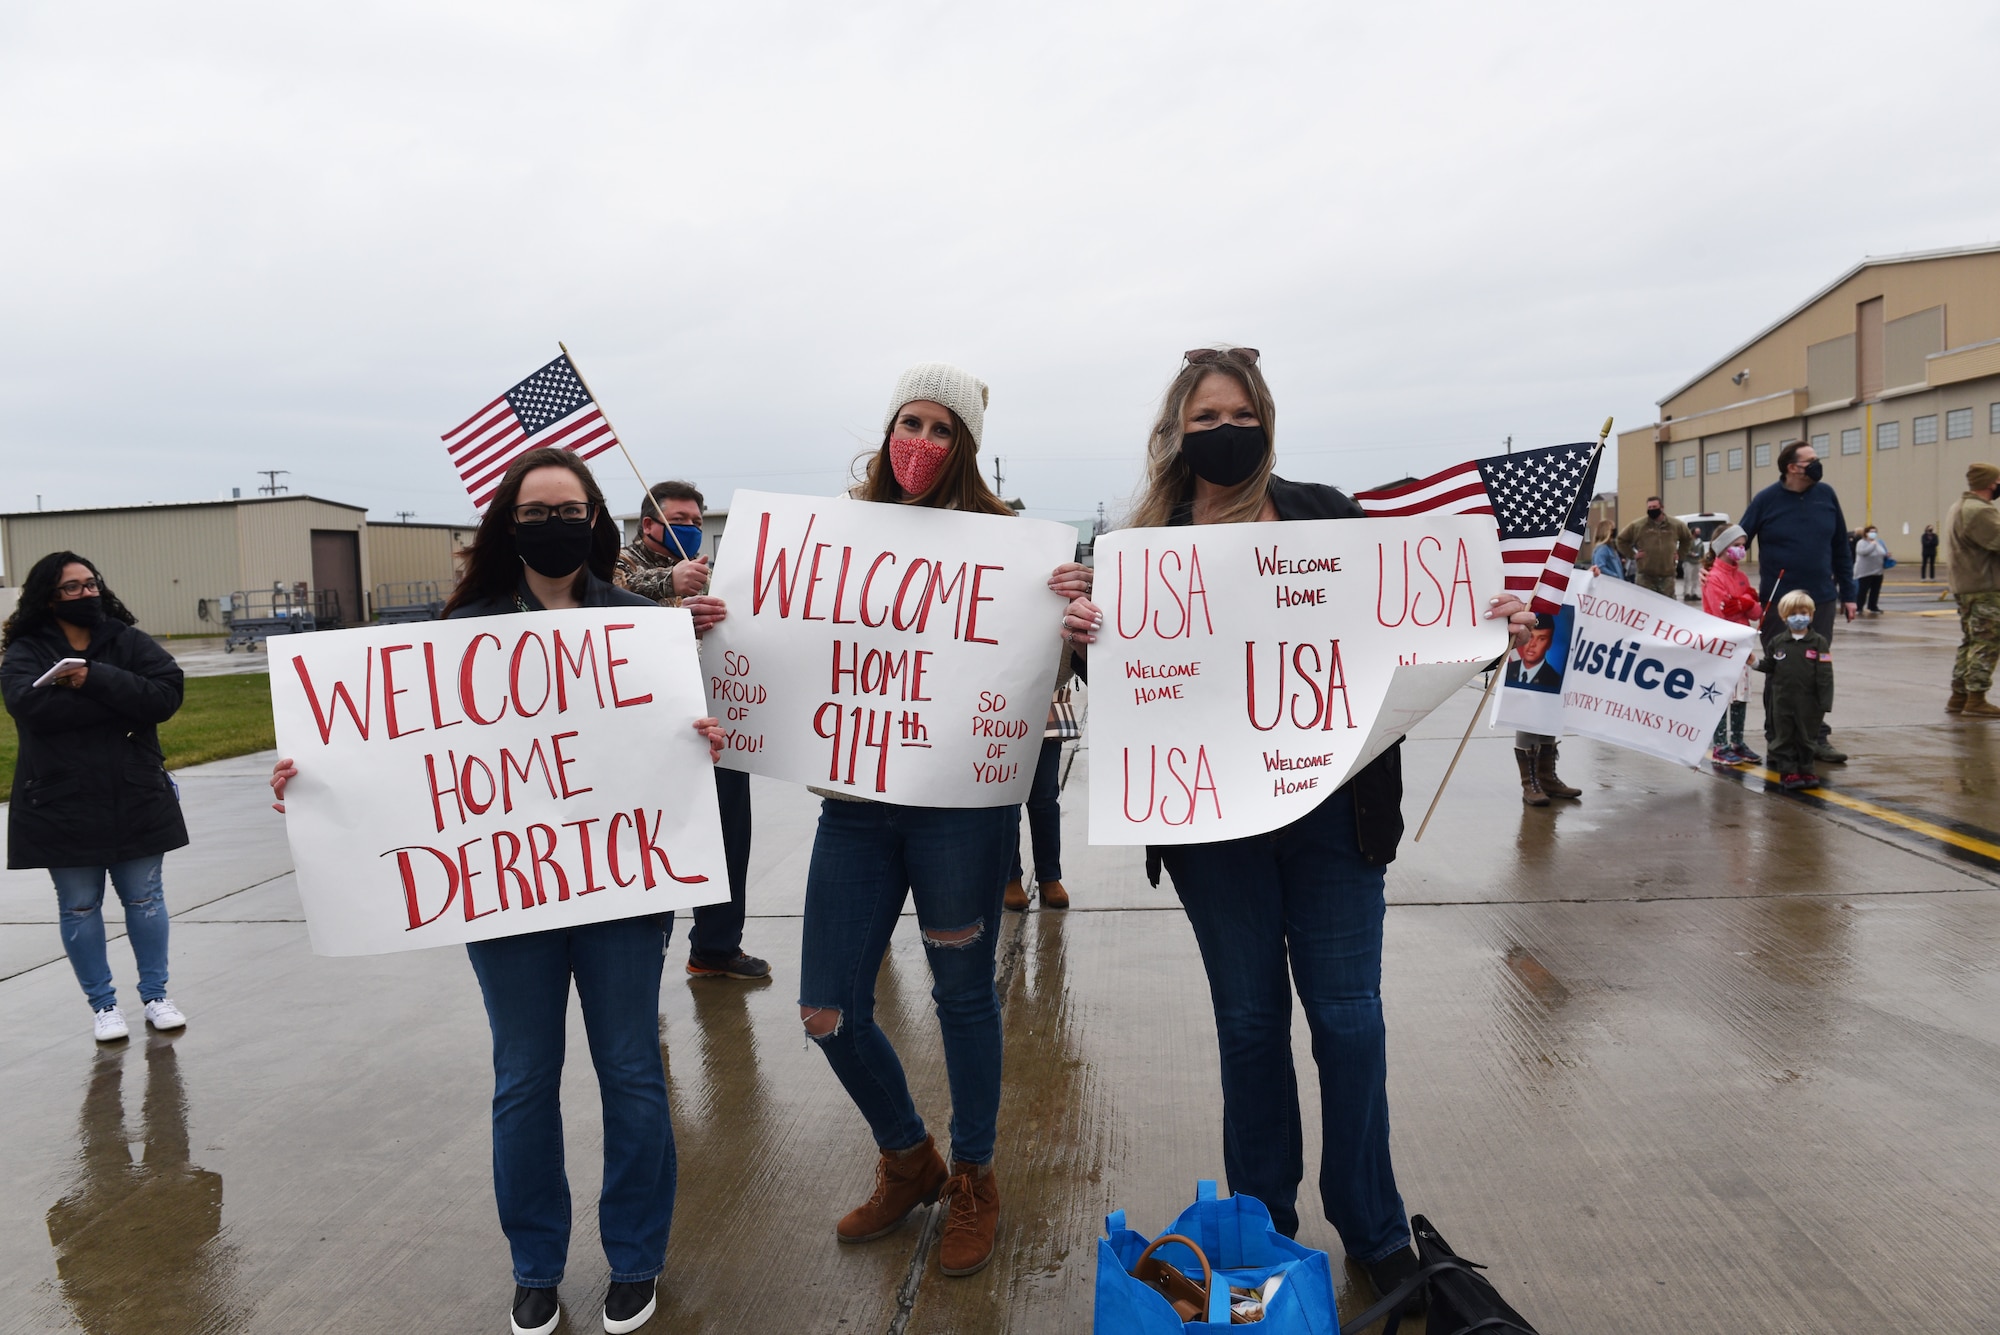 914th Airmen return home from deployment